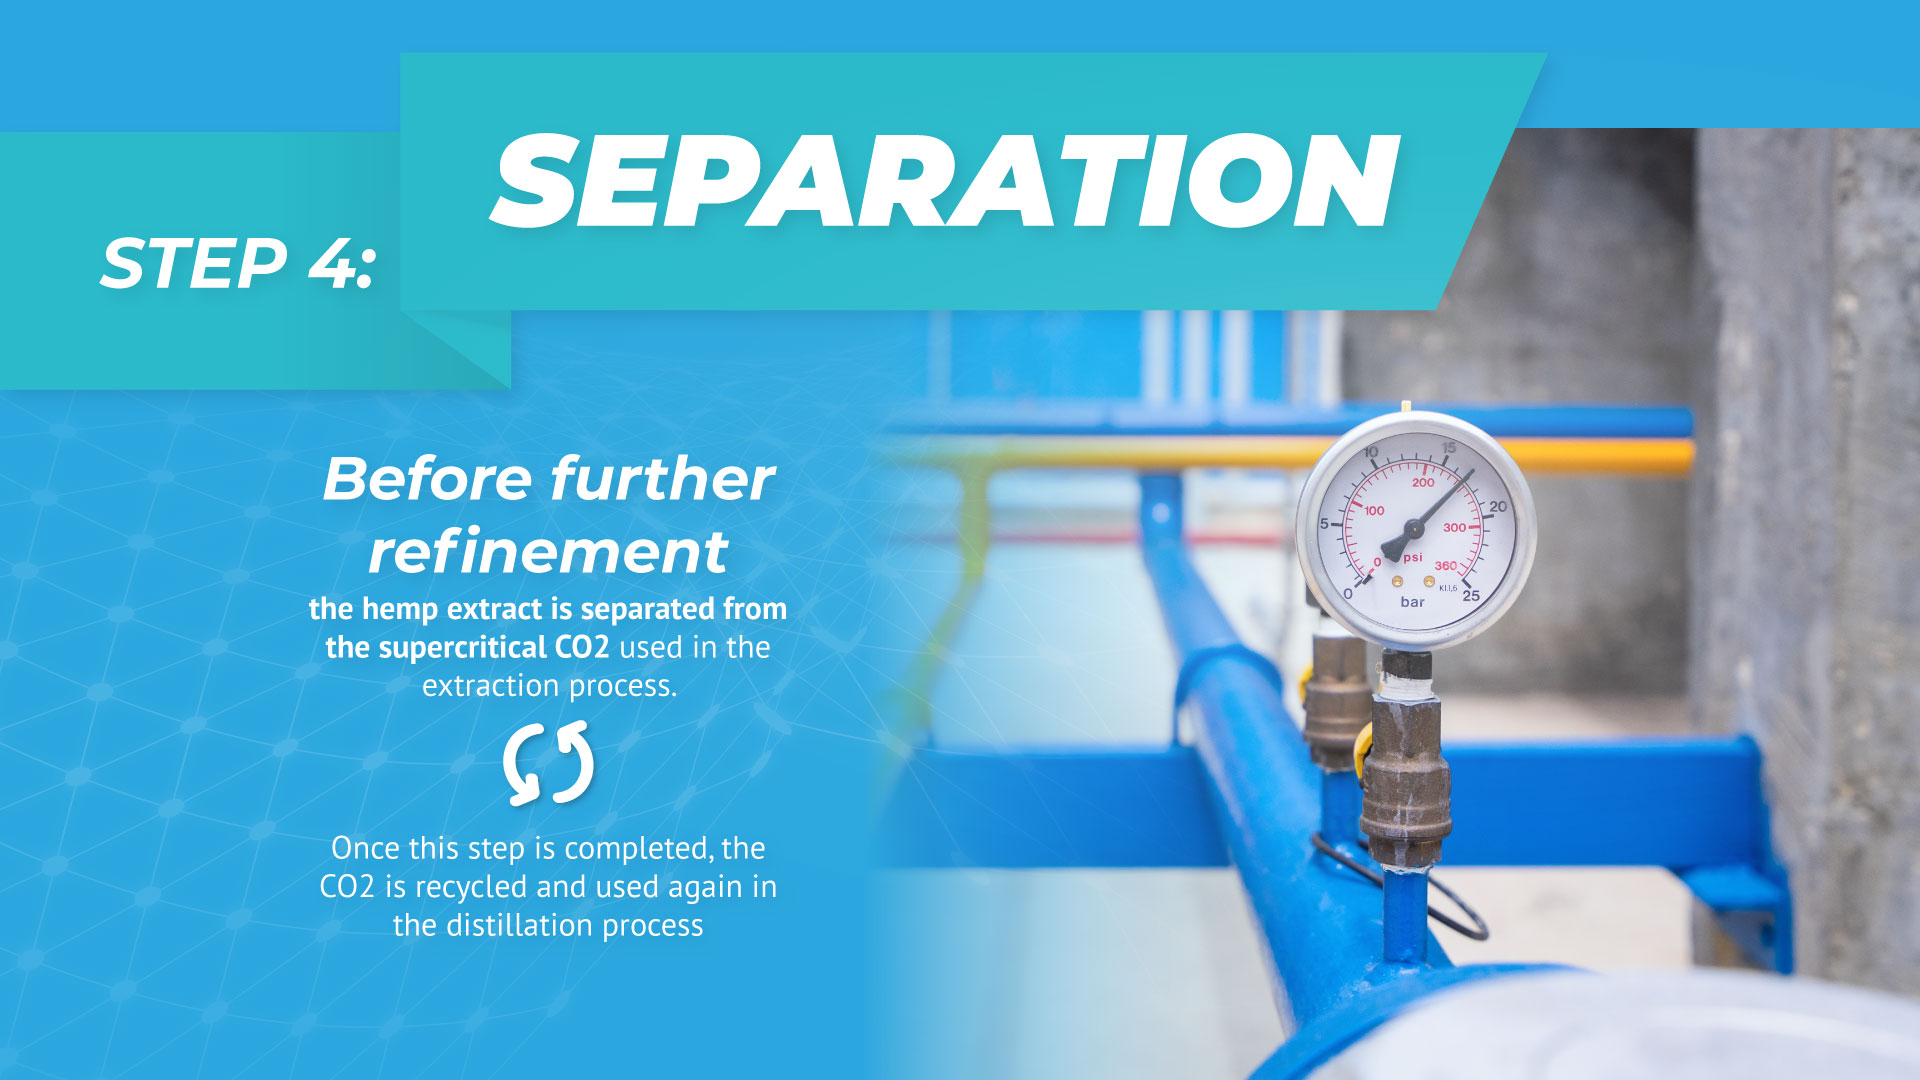 SEPARATION Before further refinement, the hemp extract is separated from the supercritical CO2 used in the extraction process. Once this step is completed, the CO2 is recycled and used again in the distillation process.